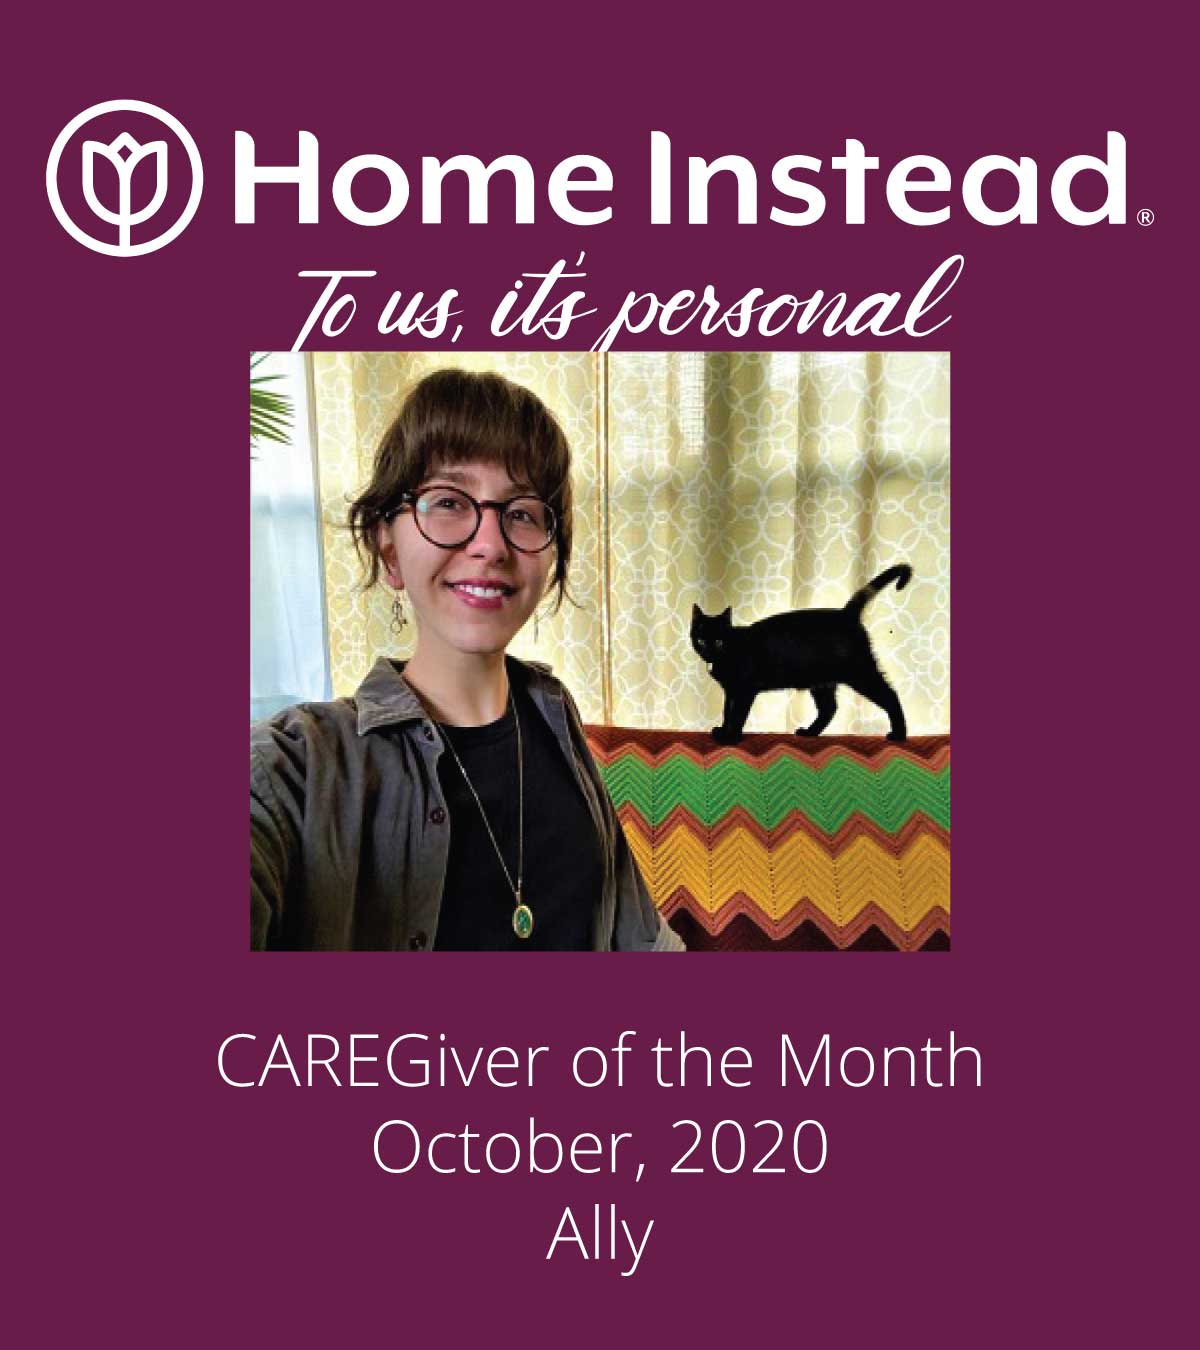 Home Instead Caregiver of the Month Ally